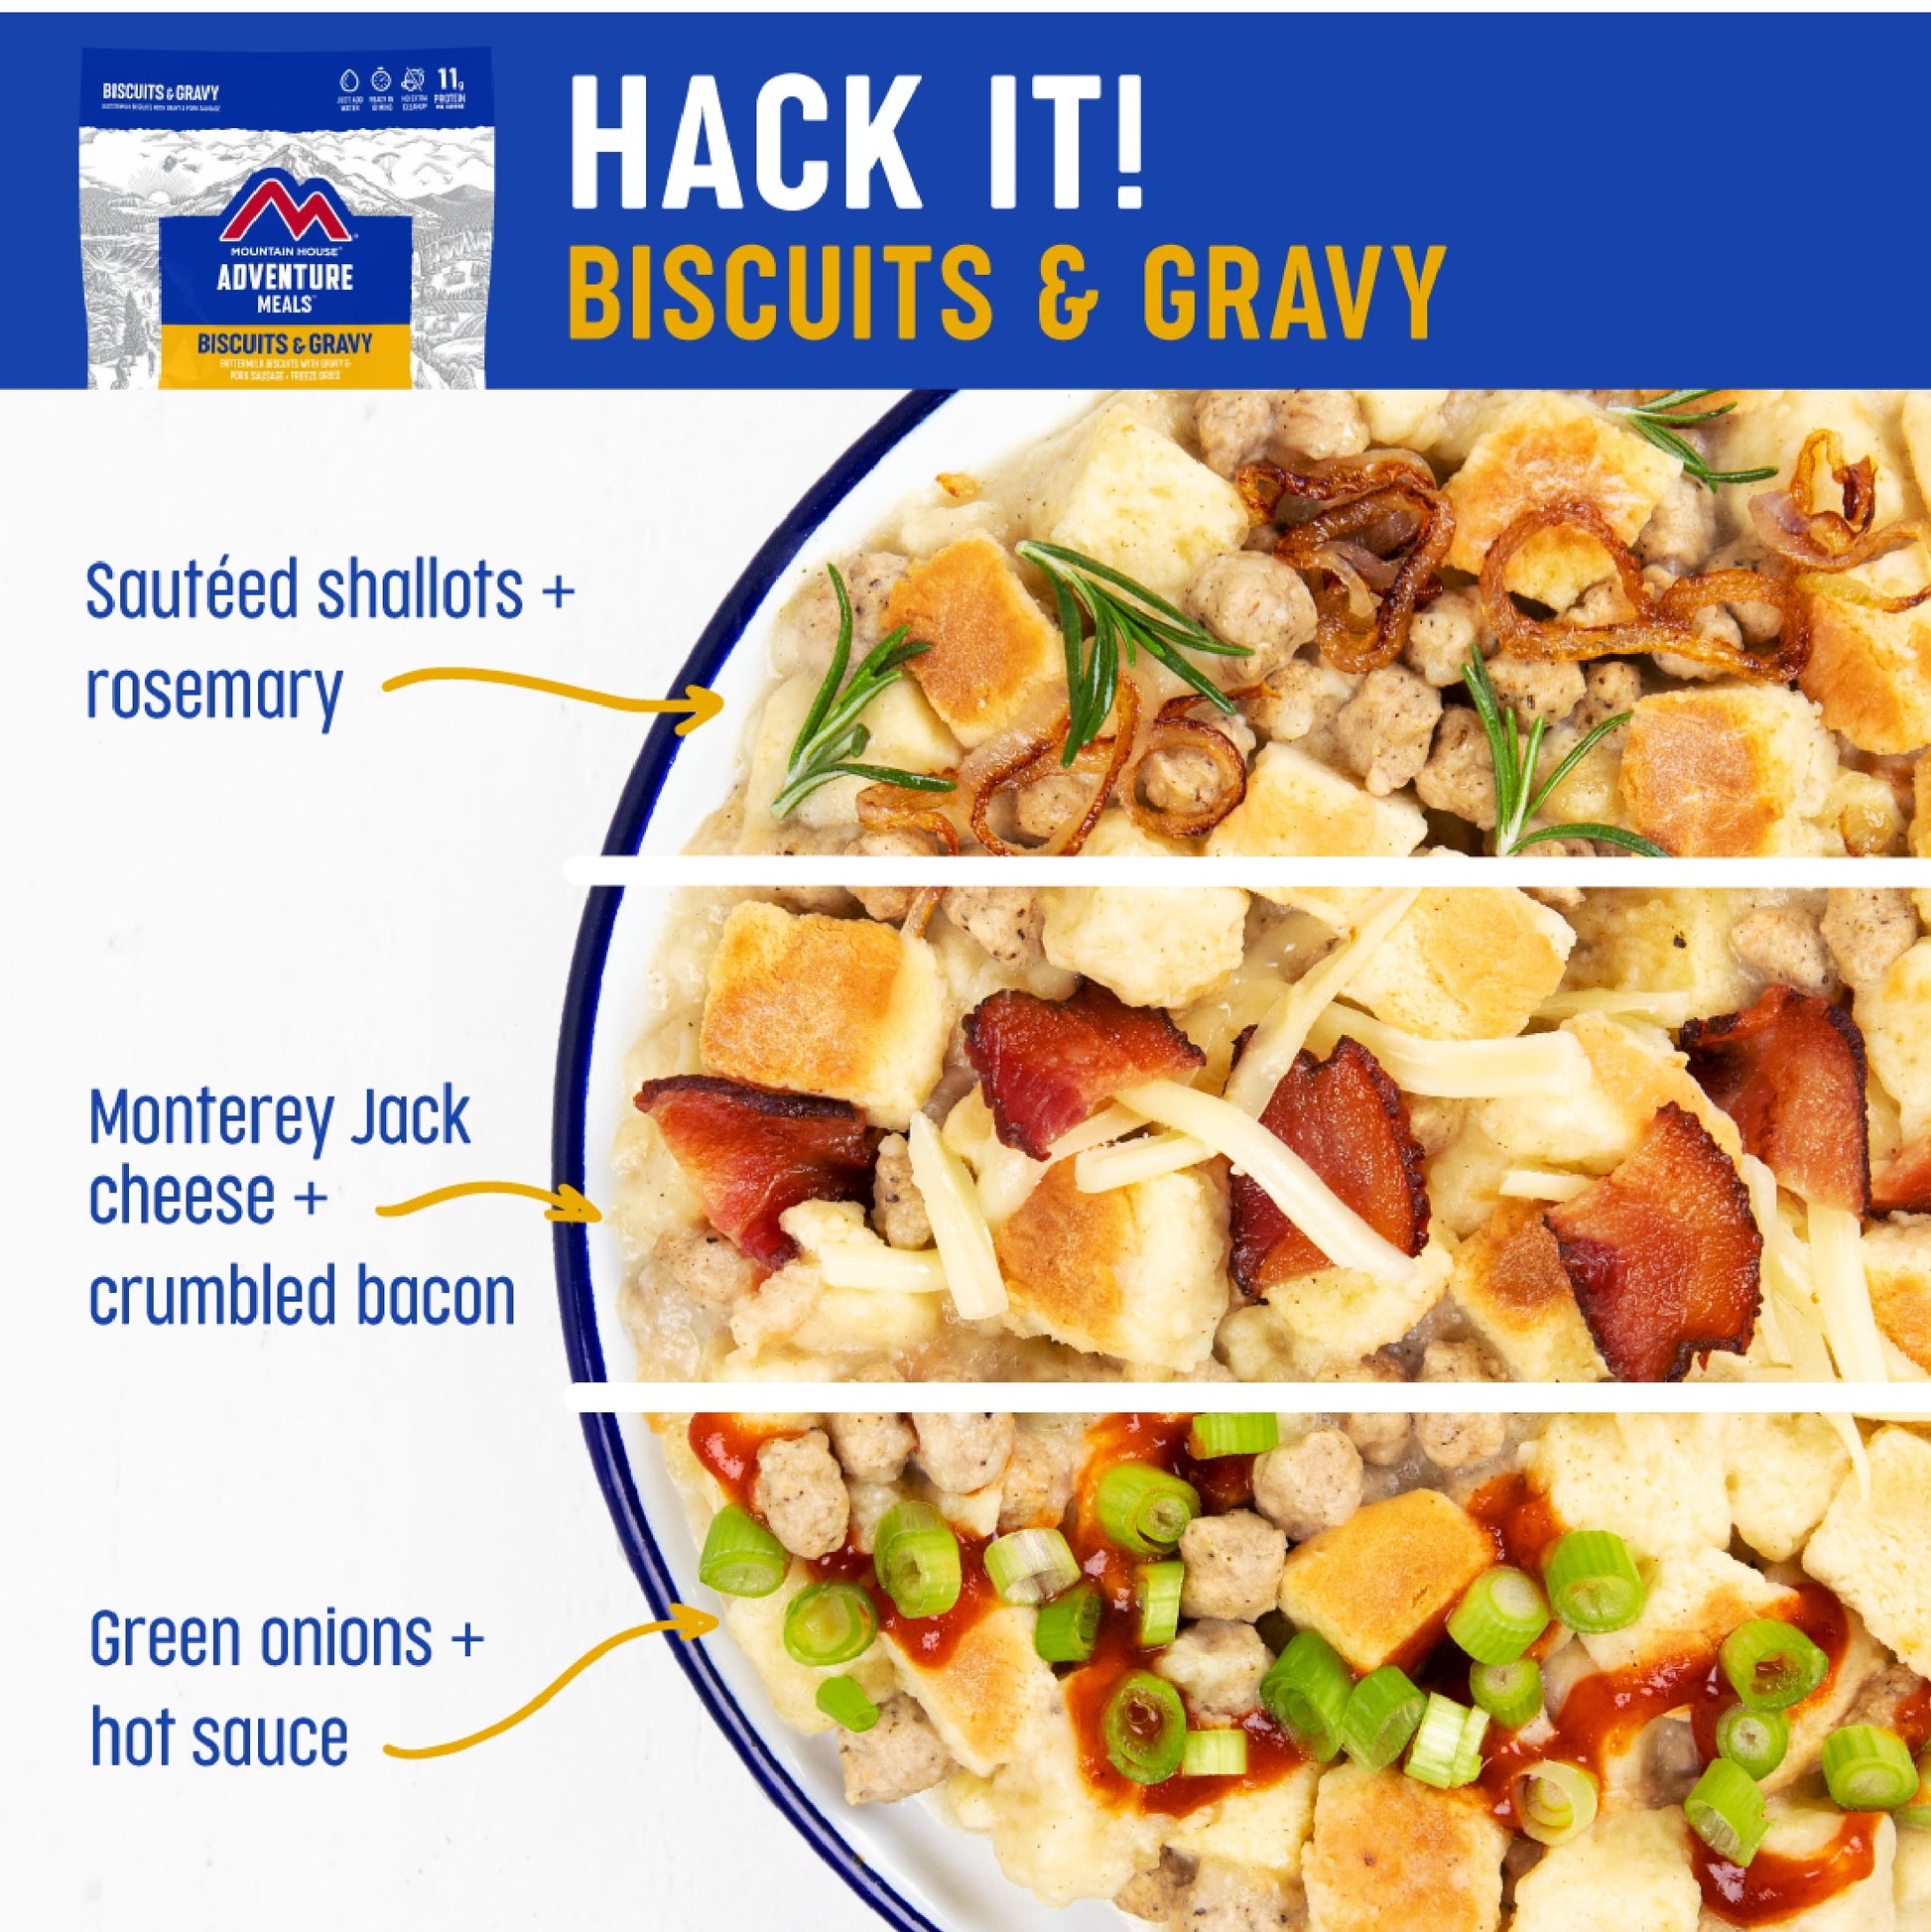 Biscuits & Gravy, Freeze-Dried Camping & Backpacking Food, 2 Servings